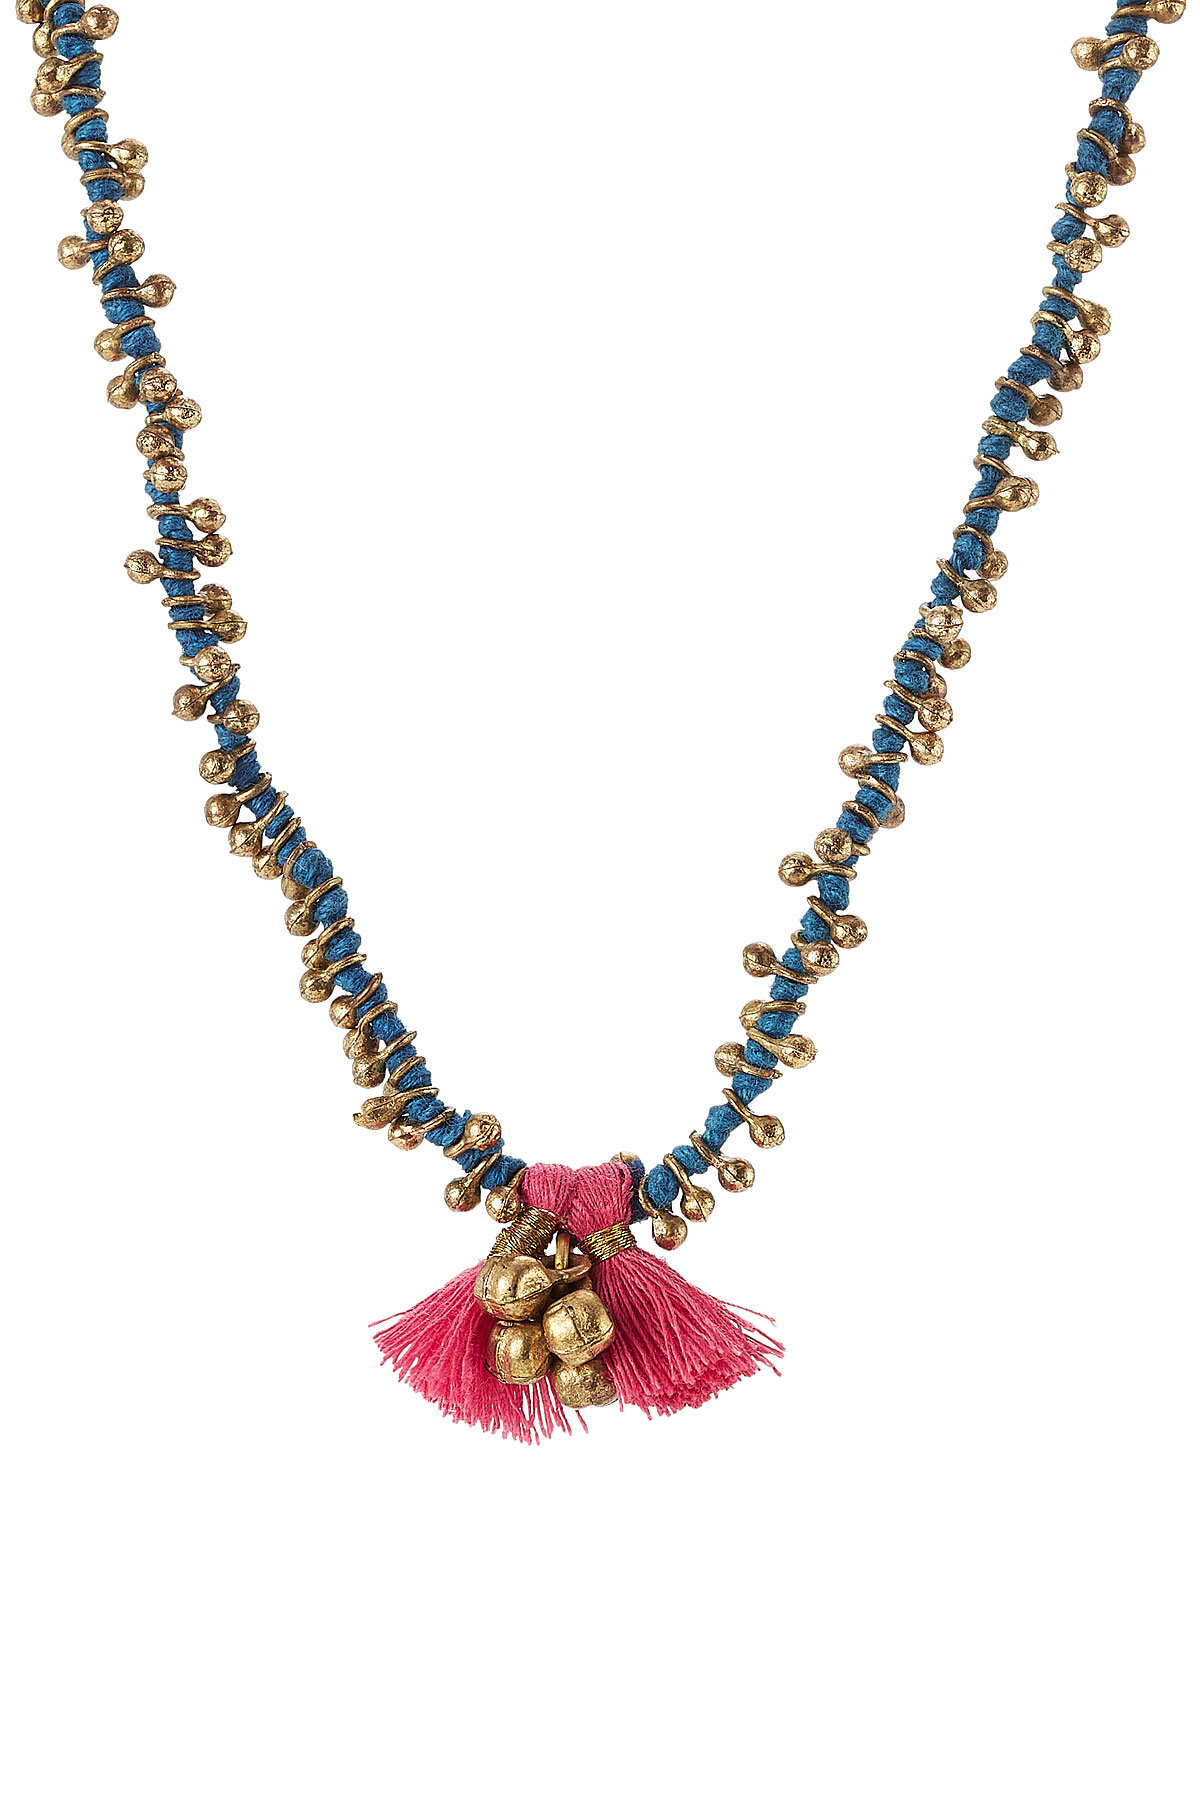 Embellished Necklace with Tassel by Blue Hippy